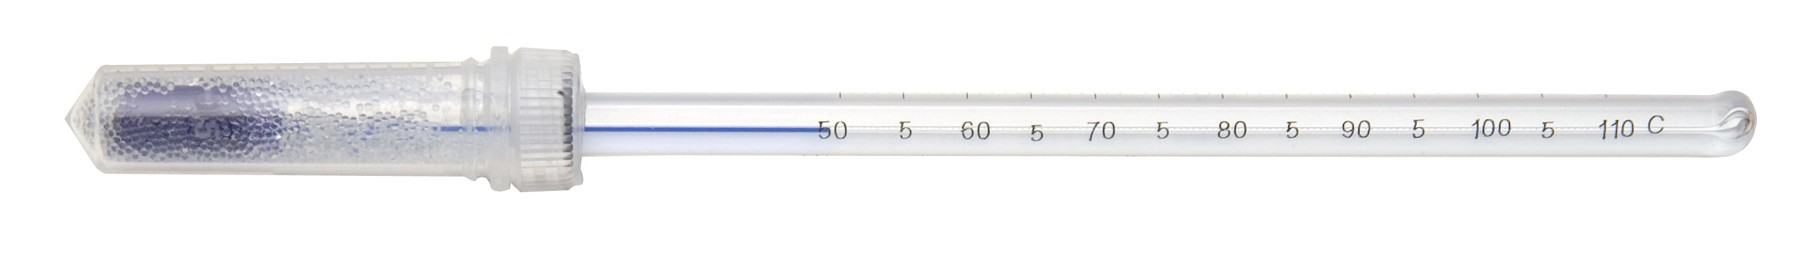 H-B DURAC Plus Dry Block/Incubator Liquid-In-Glass Thermometer; 50 to 110C, PFA Safety Coated, 35mm Immersion, Organic Liquid Fill